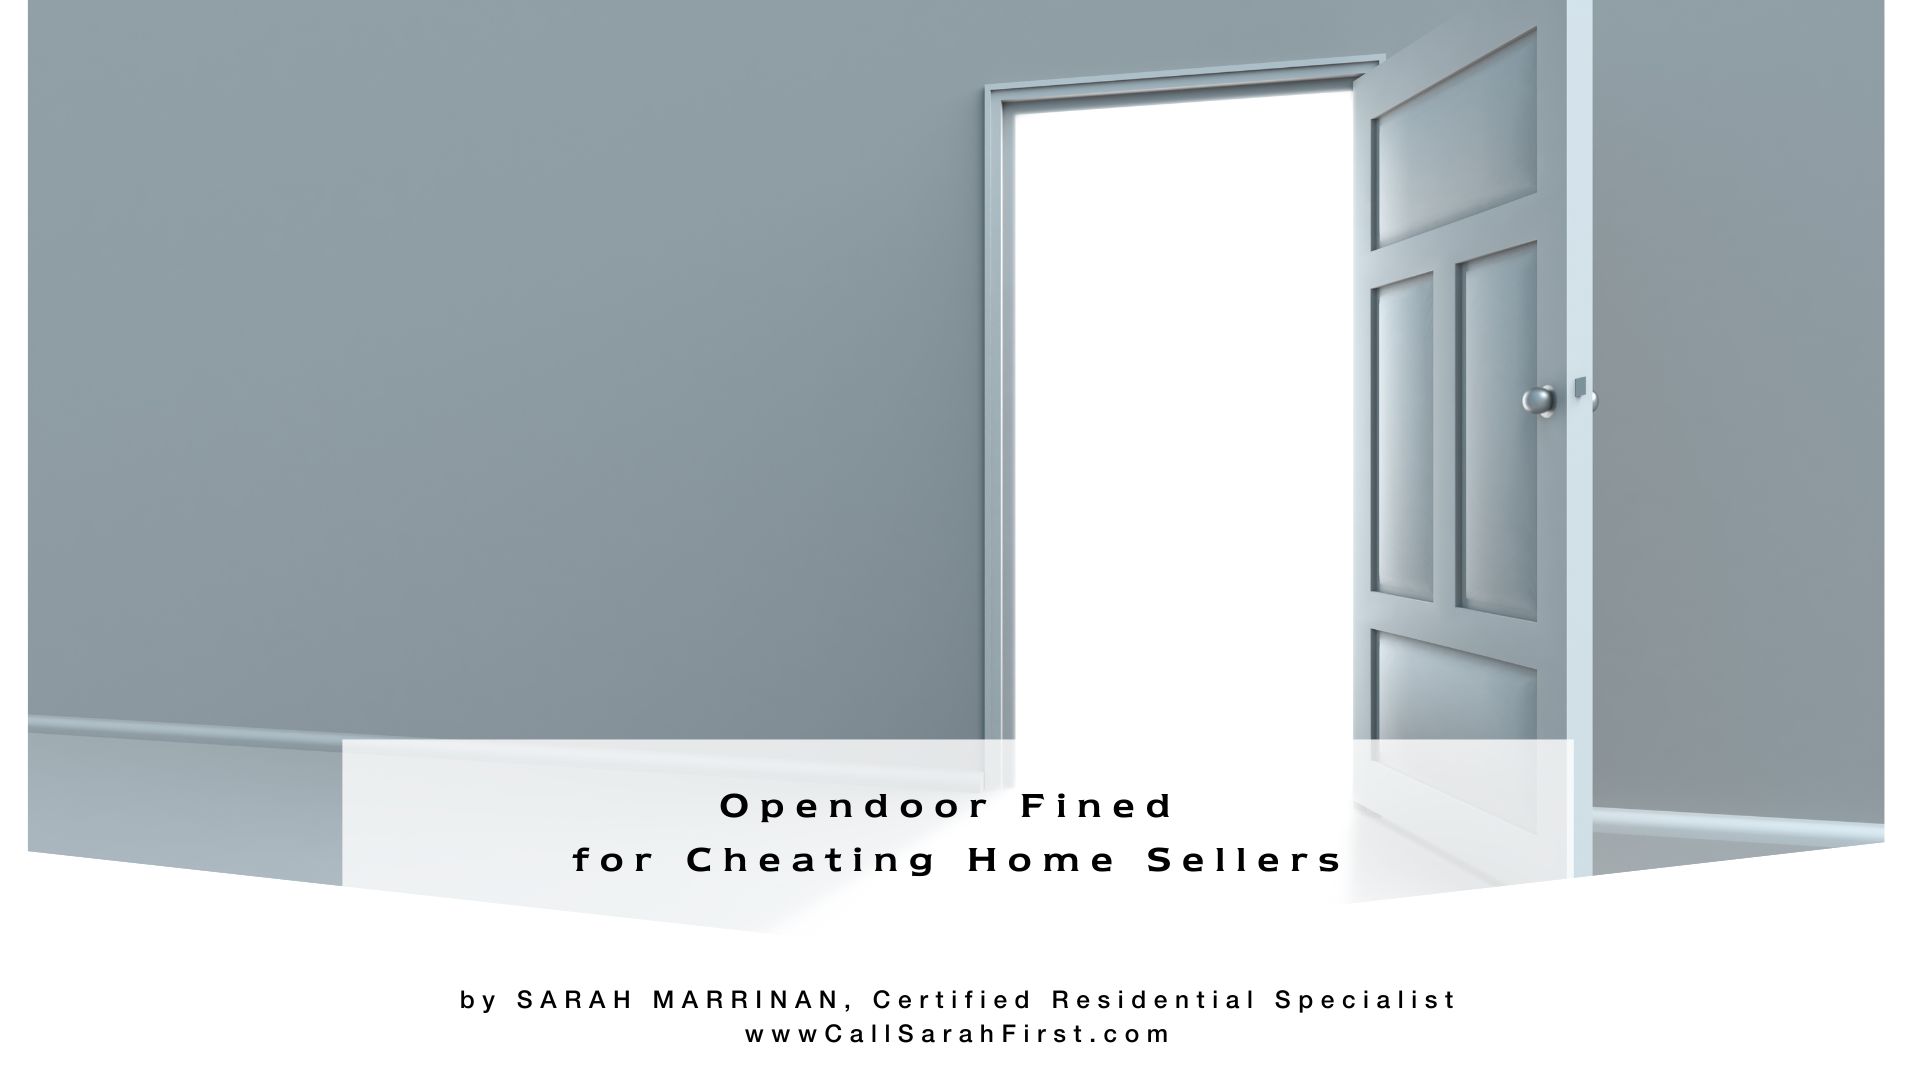 Opendoor Fined for cheating home sellers with misleading claims